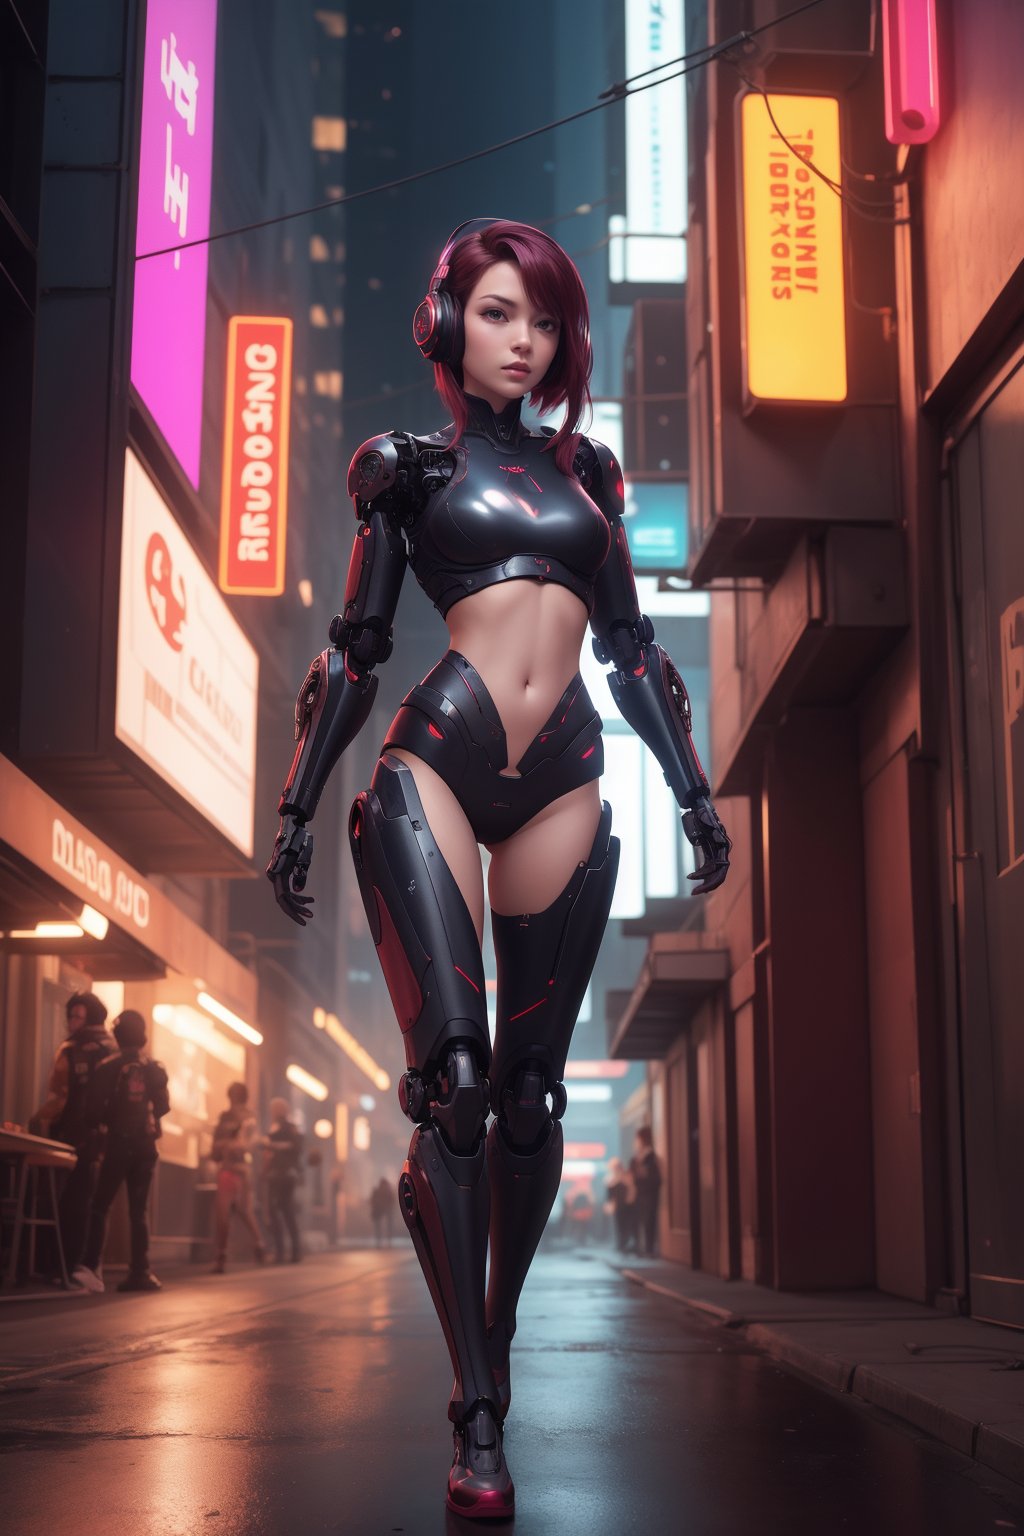 8k resolution, a masterpiece,hdr,ray tracing light, masterpiece,ultra detailled,ultra small detaills,photo-realistic,full body epic portrai, woman with headphones on, half cyborg half human,cyberpunk art, cgsociety contest winner, ultra detailled cyborg parts, black and red metal , intricate ornate anime cgi style, cute cyborg girl, cyberpunk photo,ultra tight sexy clothes,lot of mechanical parts,burgundy hair,neon lights reflection,exposed abdomen,sbg_imgs,  